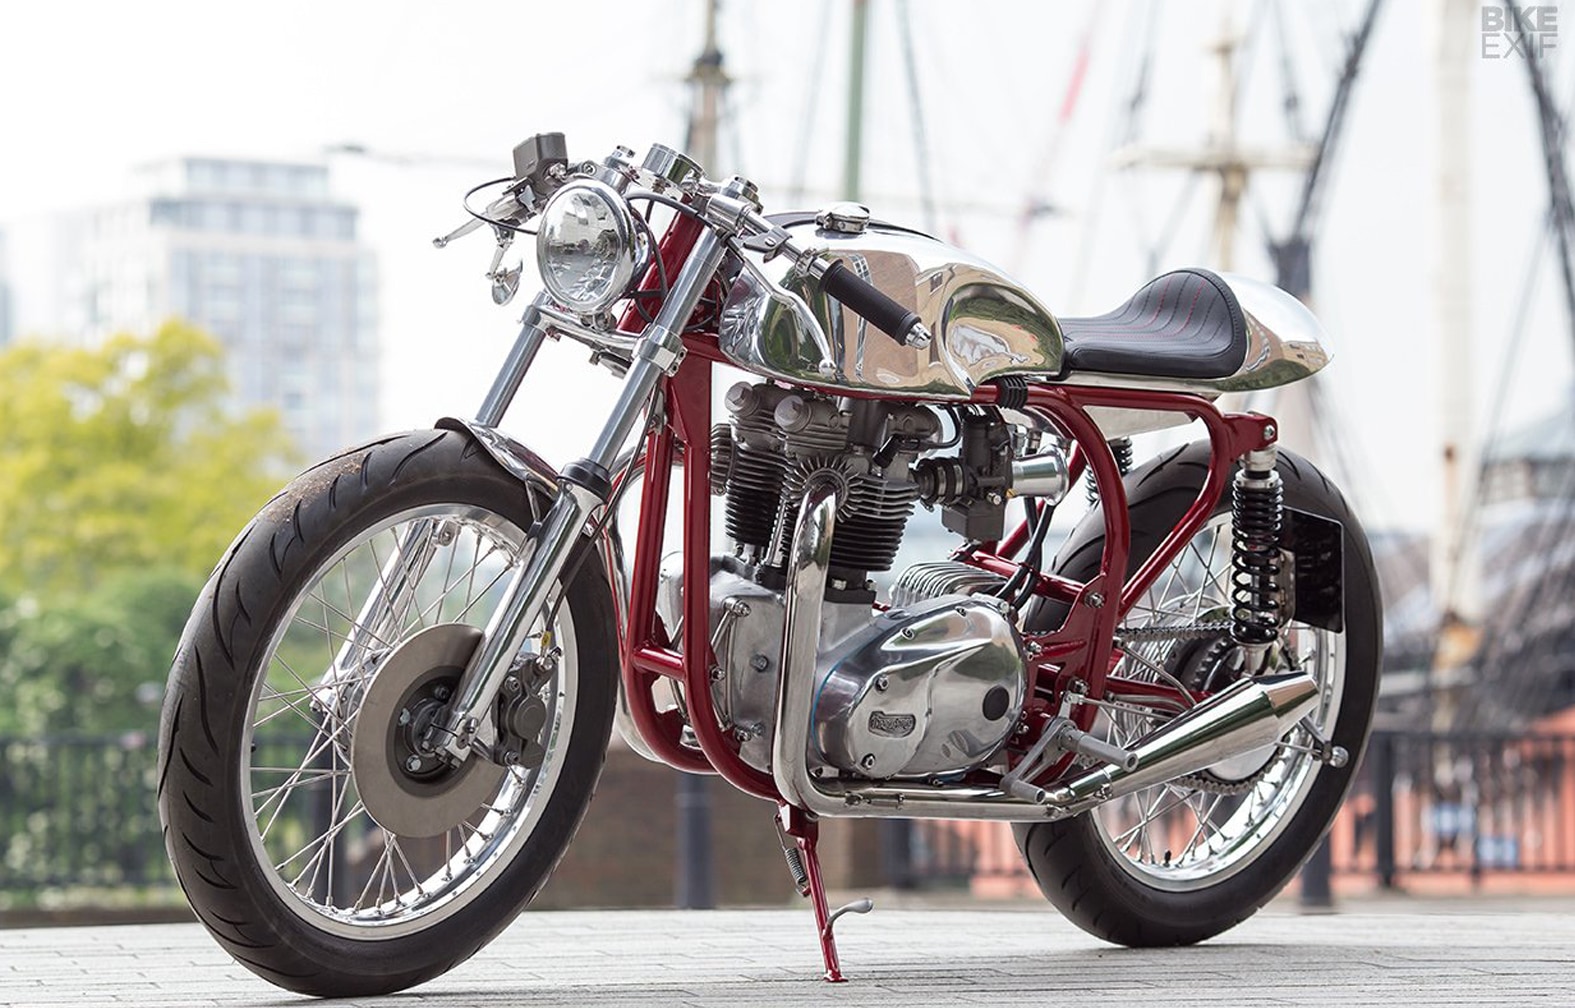 Triton custom motorcycle build by Foundry Motorcycles